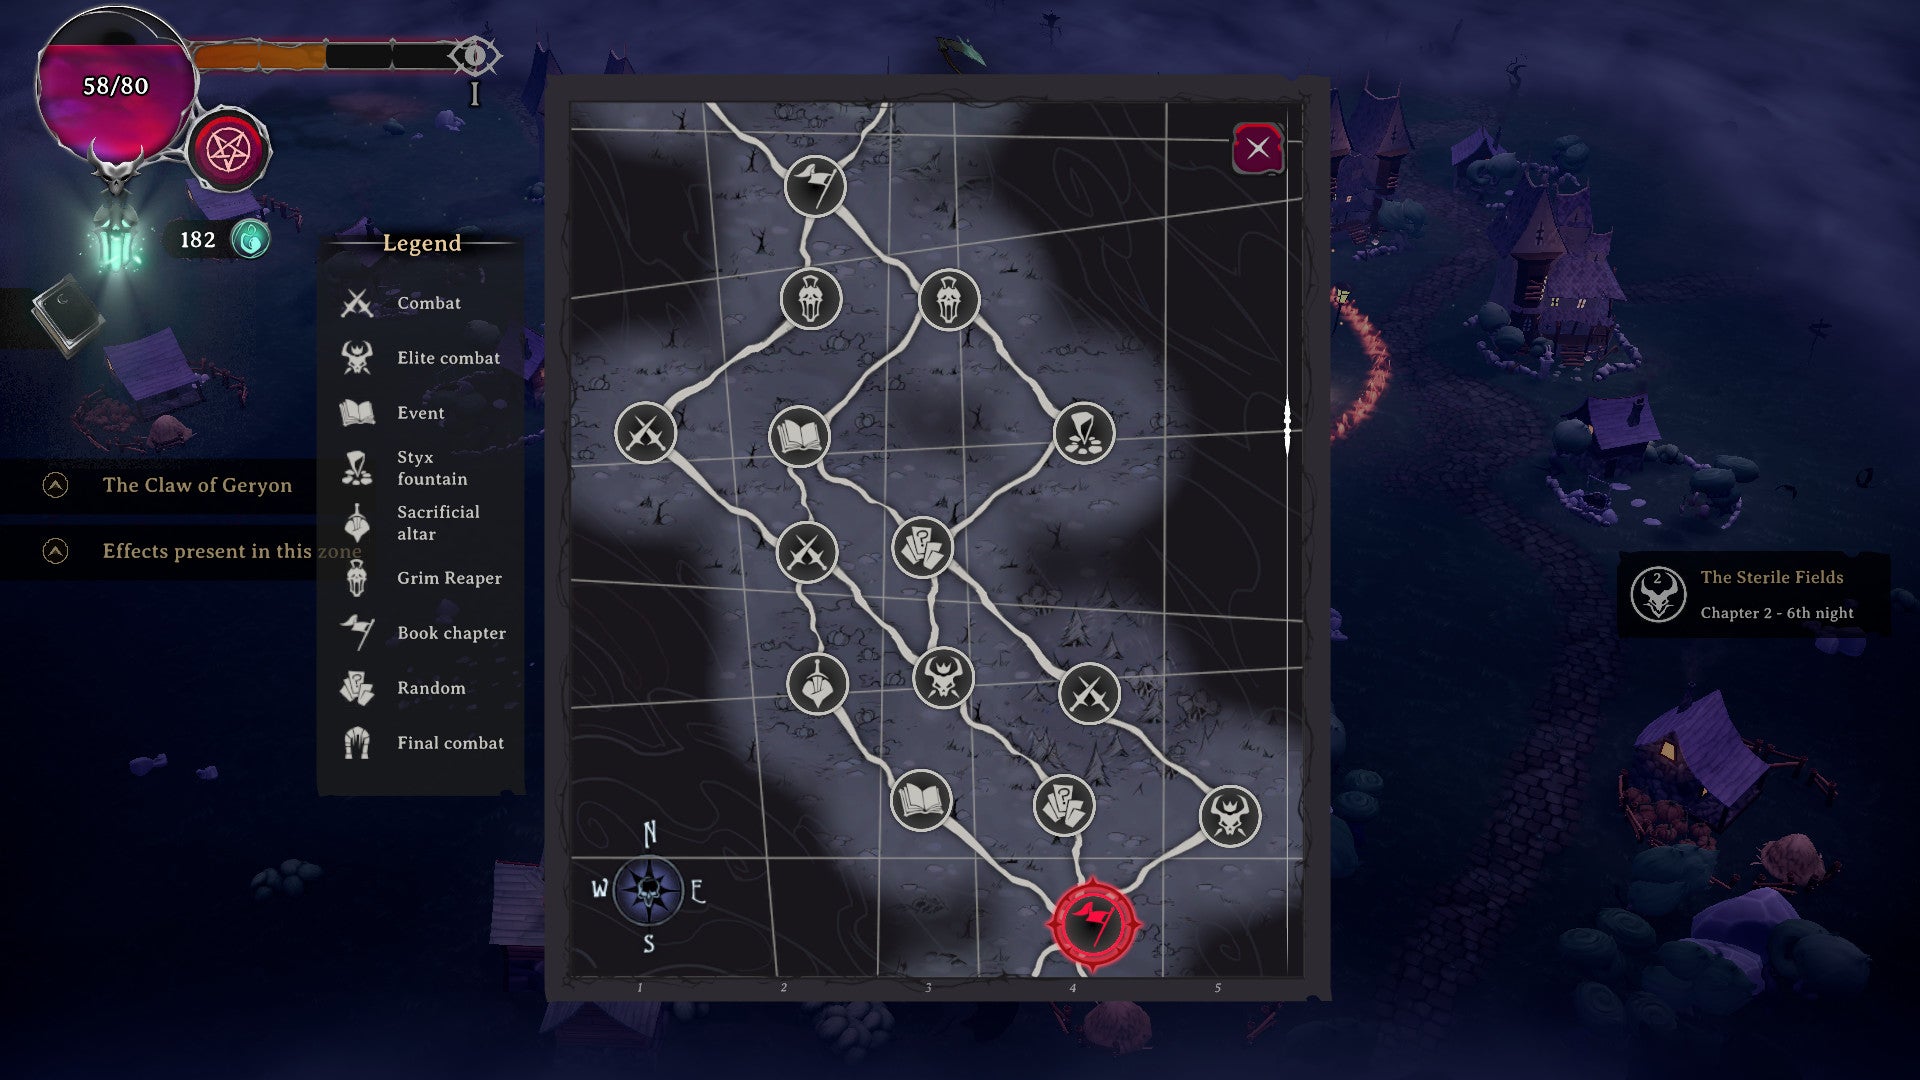 Rogue Lords' map showing the different routes you can take.